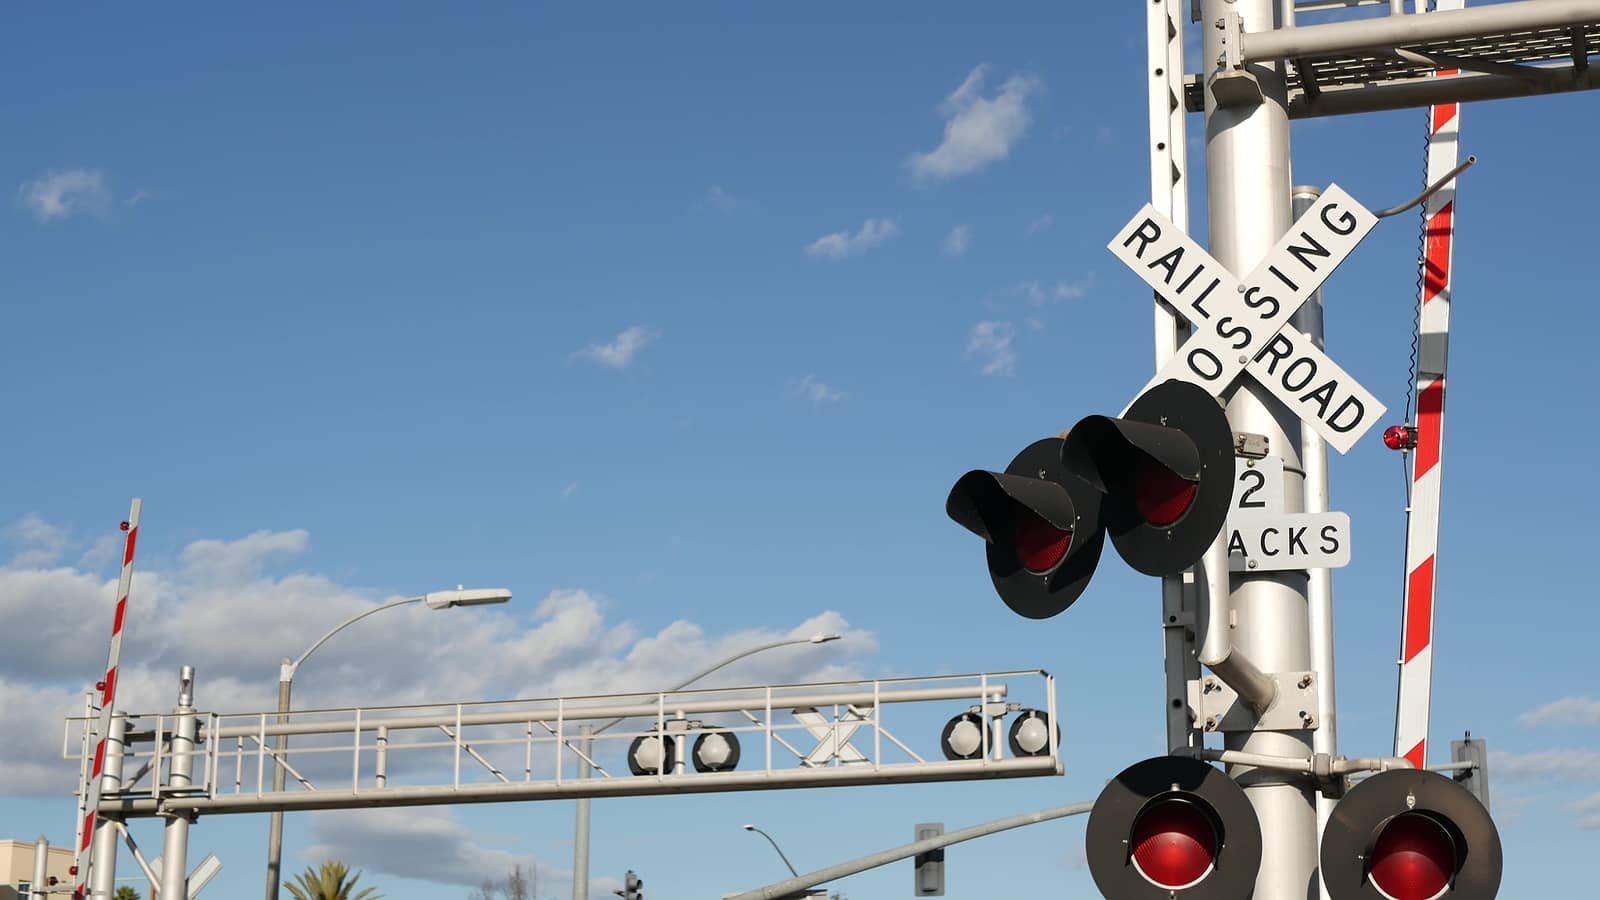 level-crossing-warning-signal-in-usa-crossbuck-notice-and-red-t